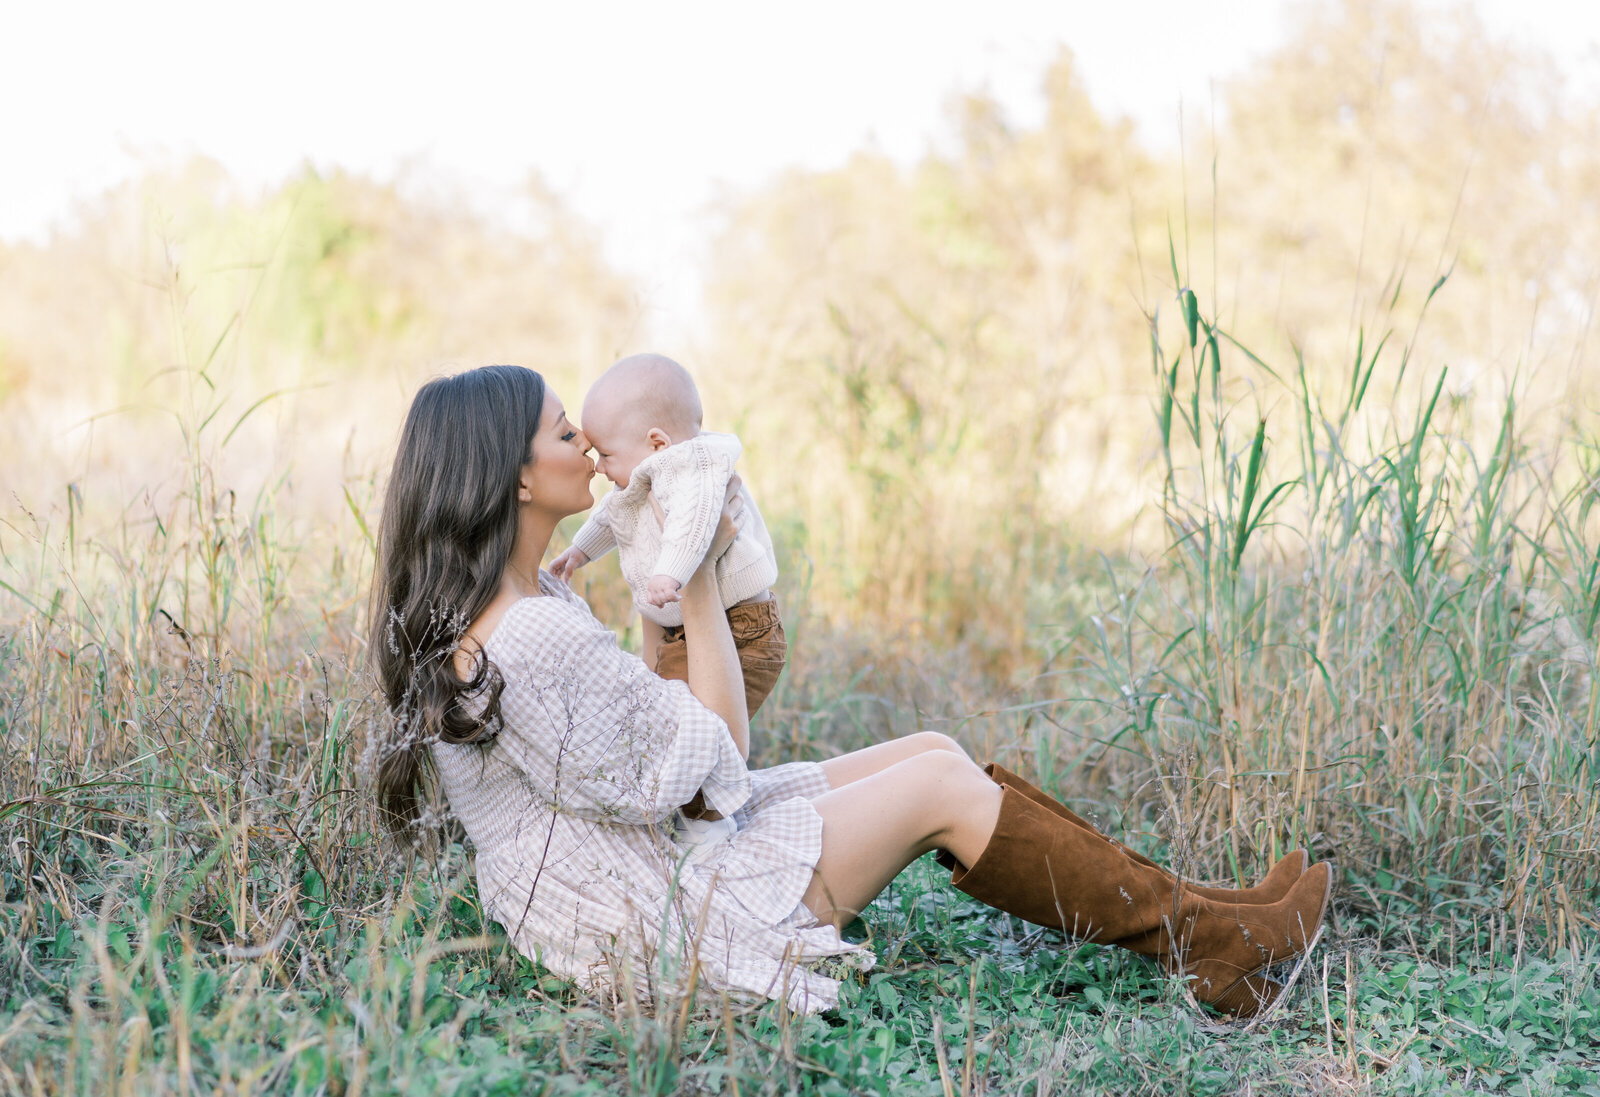 Portrait of a woman in a white dress and brown boots sitting in a country field holding and kissing a baby boy.